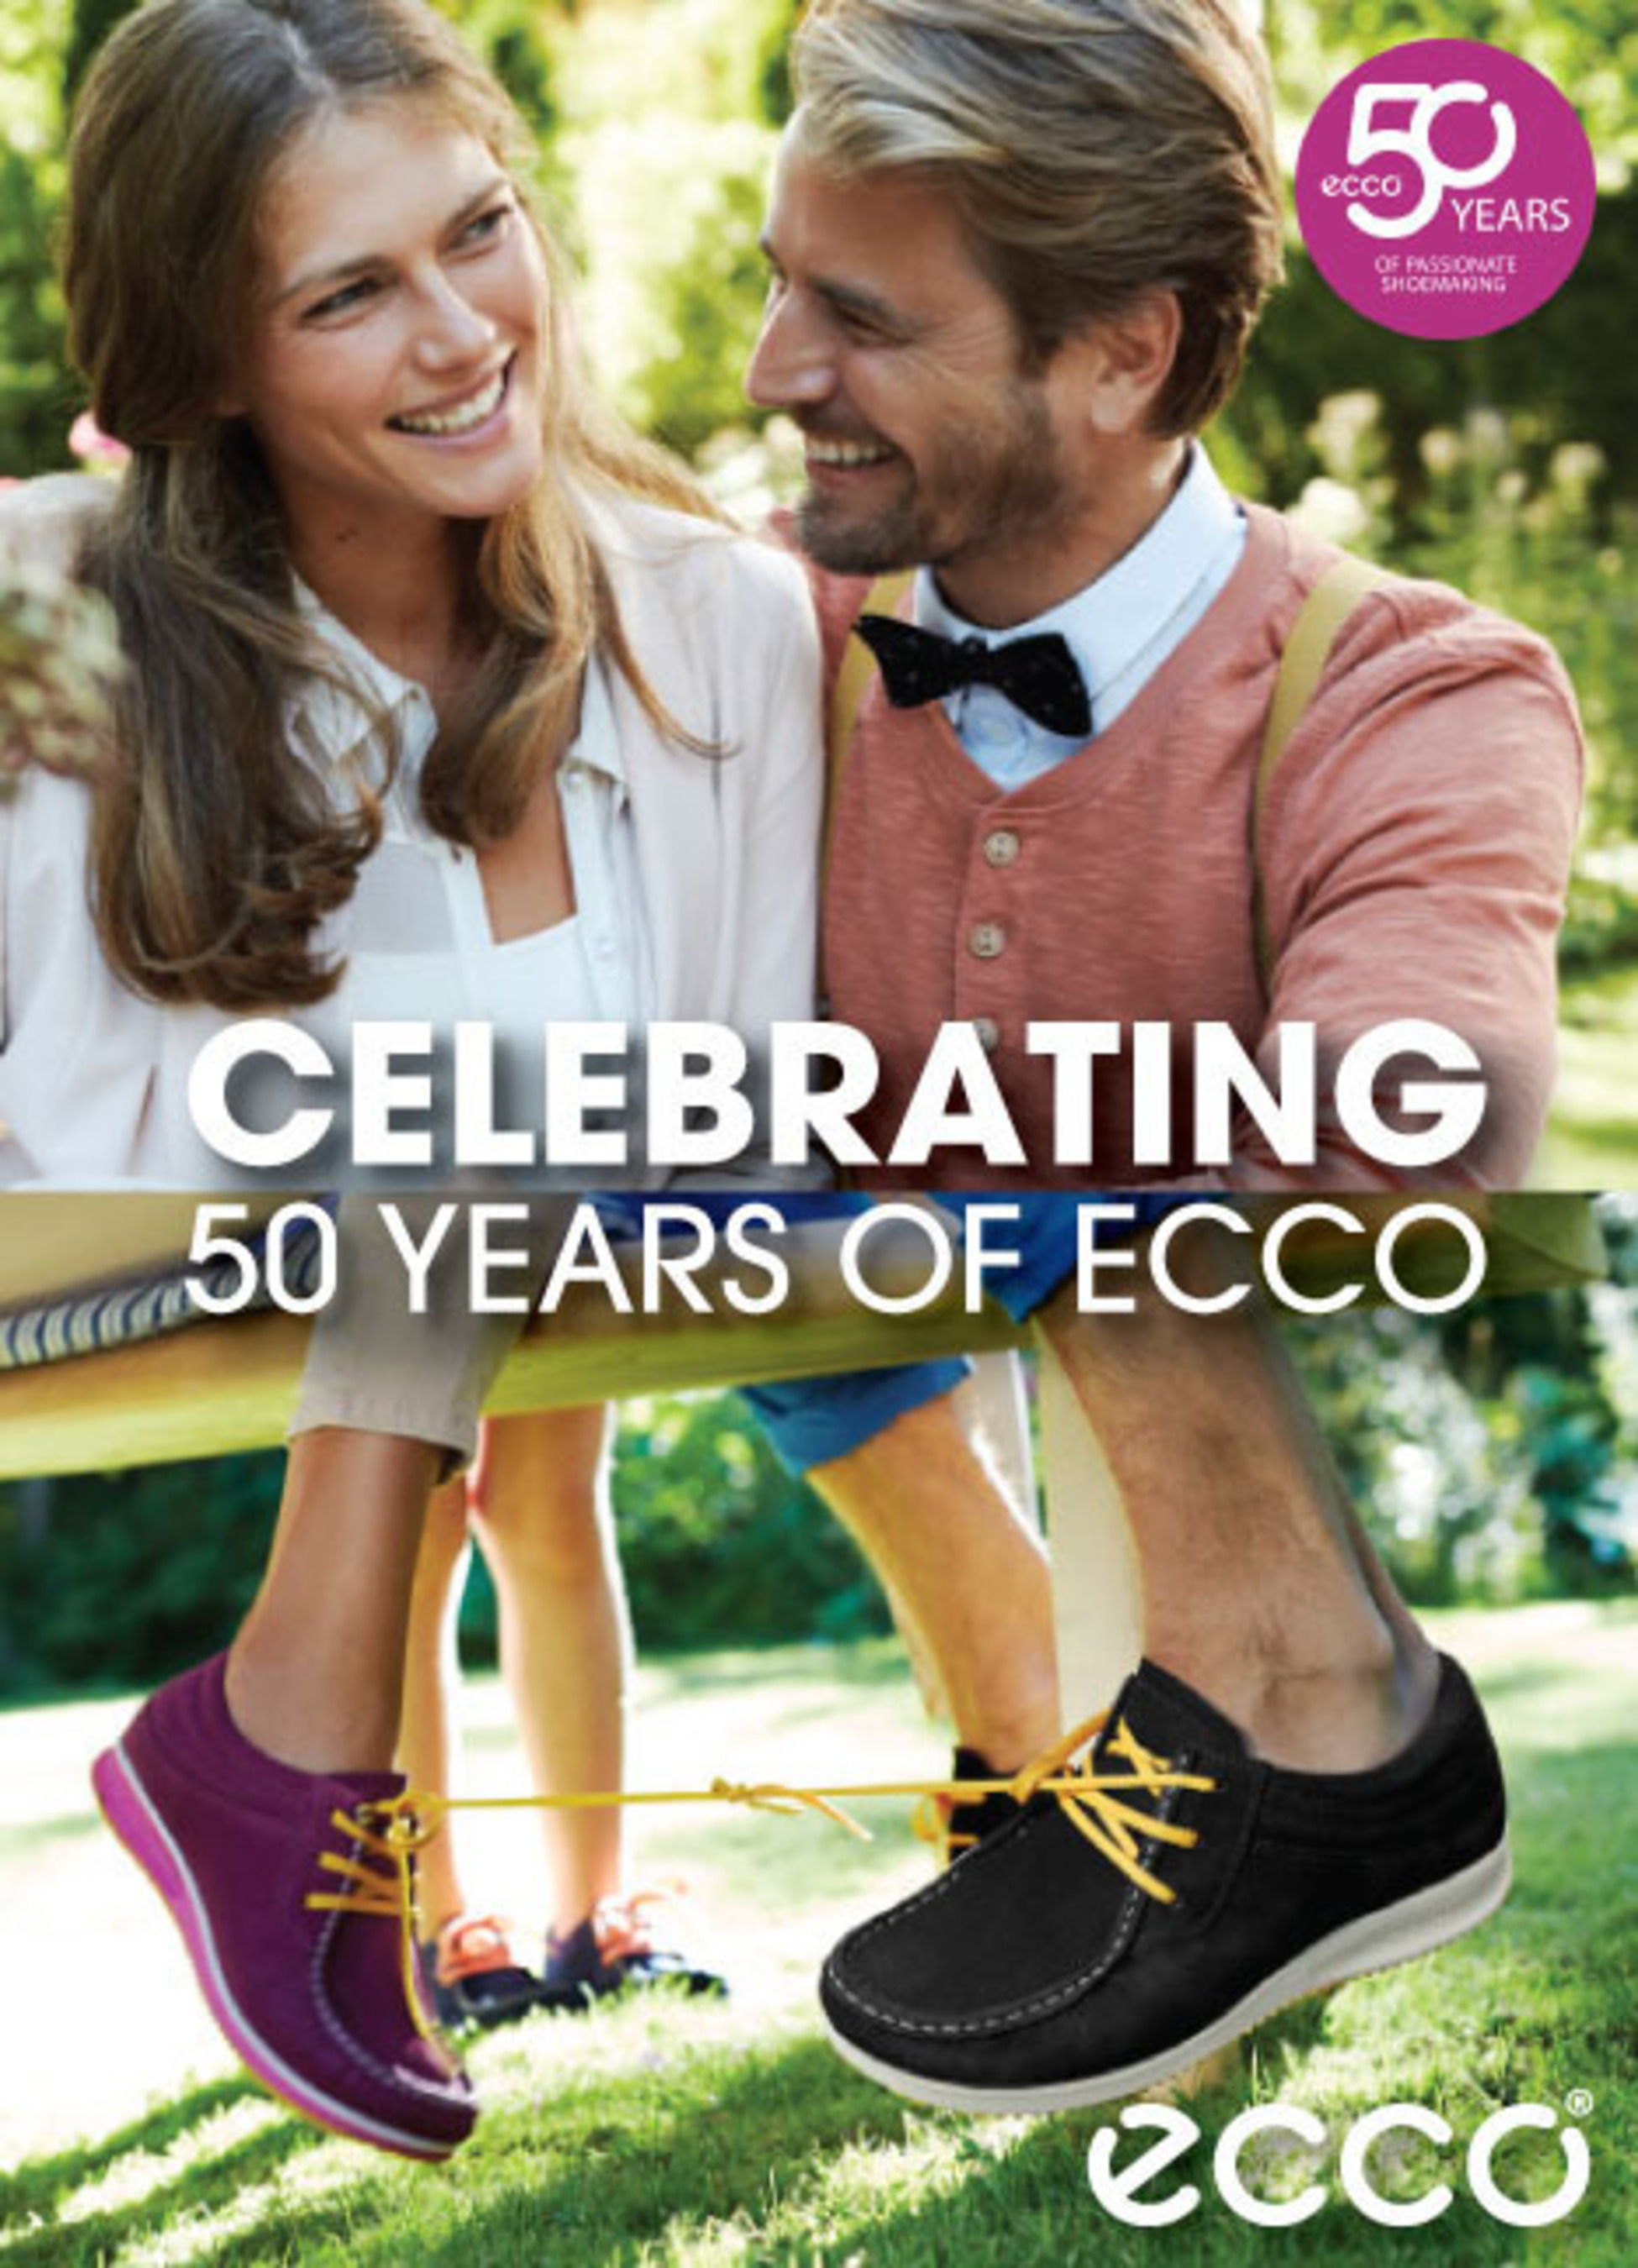 World's Second Shoe ECCO, 50 Years Of Passionate Shoemaking